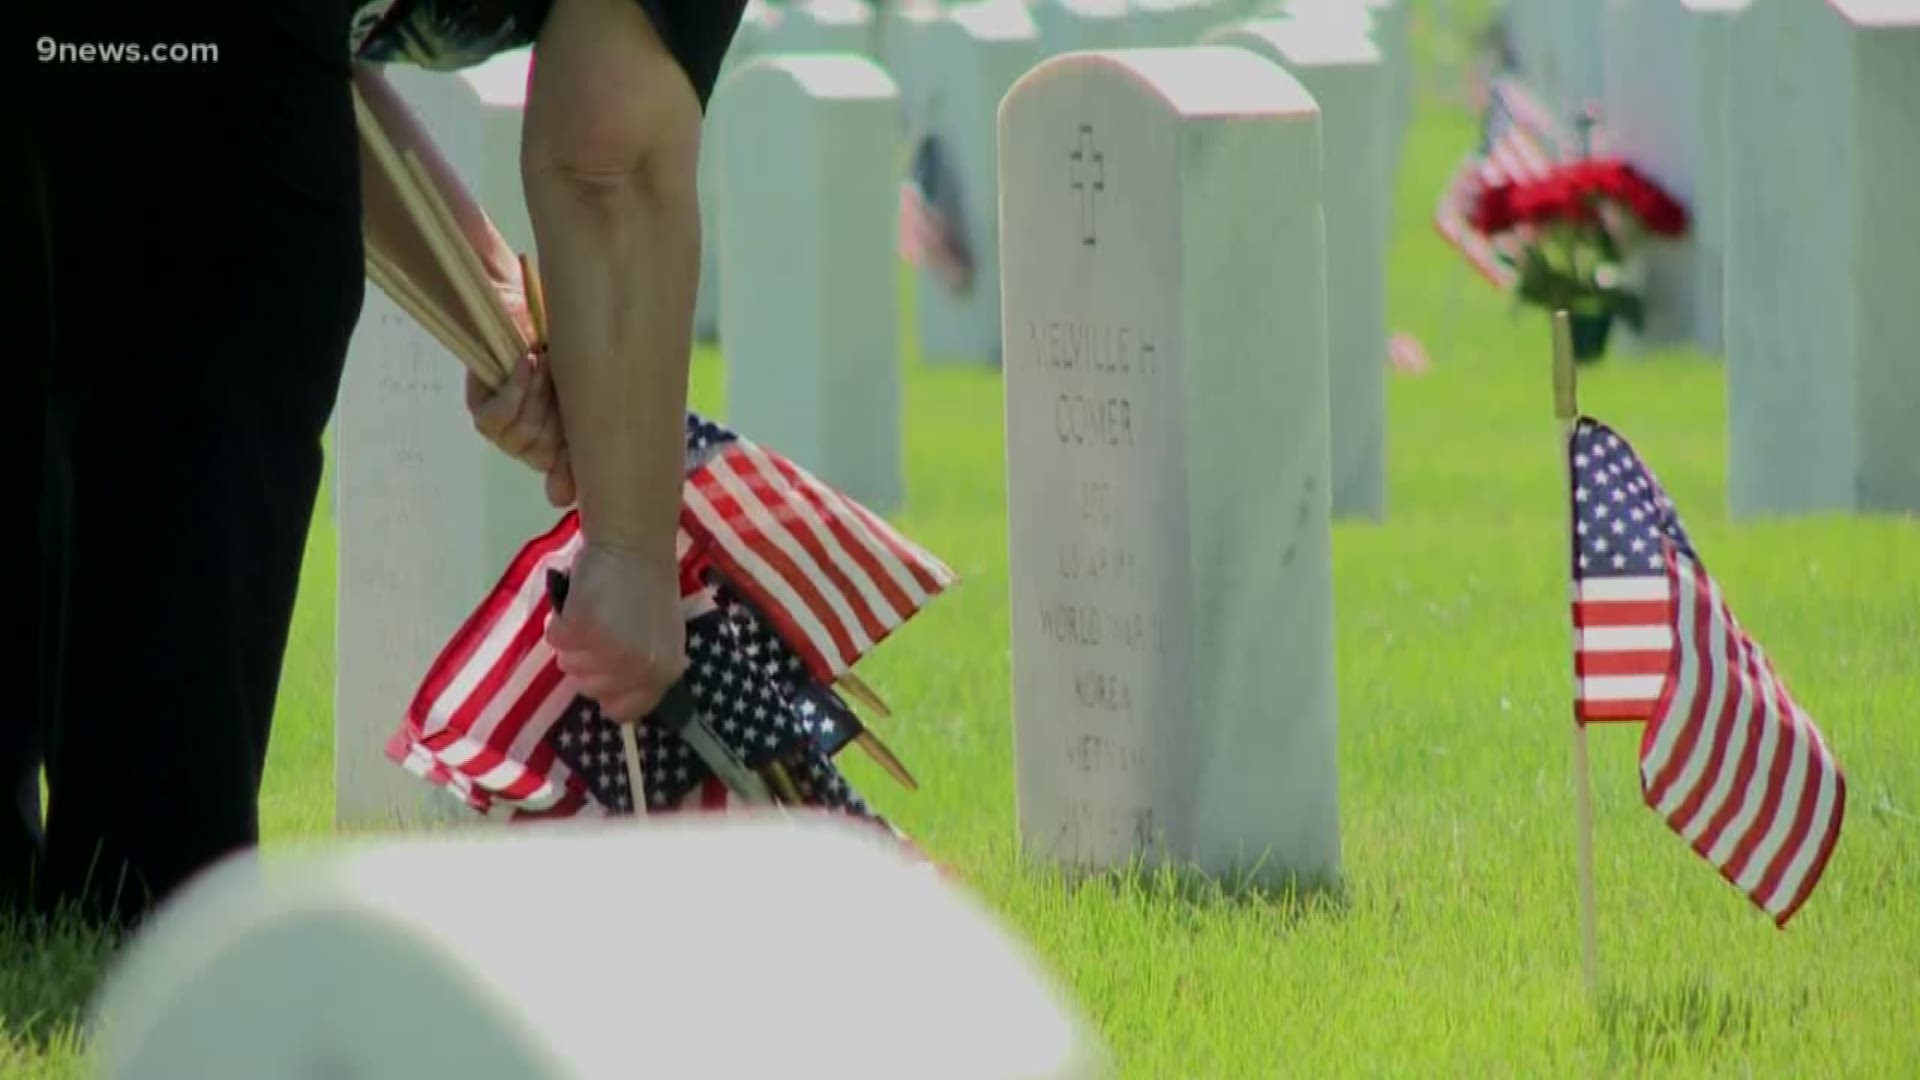 Volunteers spent part of their Sunday honoring memorial day at Fort Logan National Cemetery.